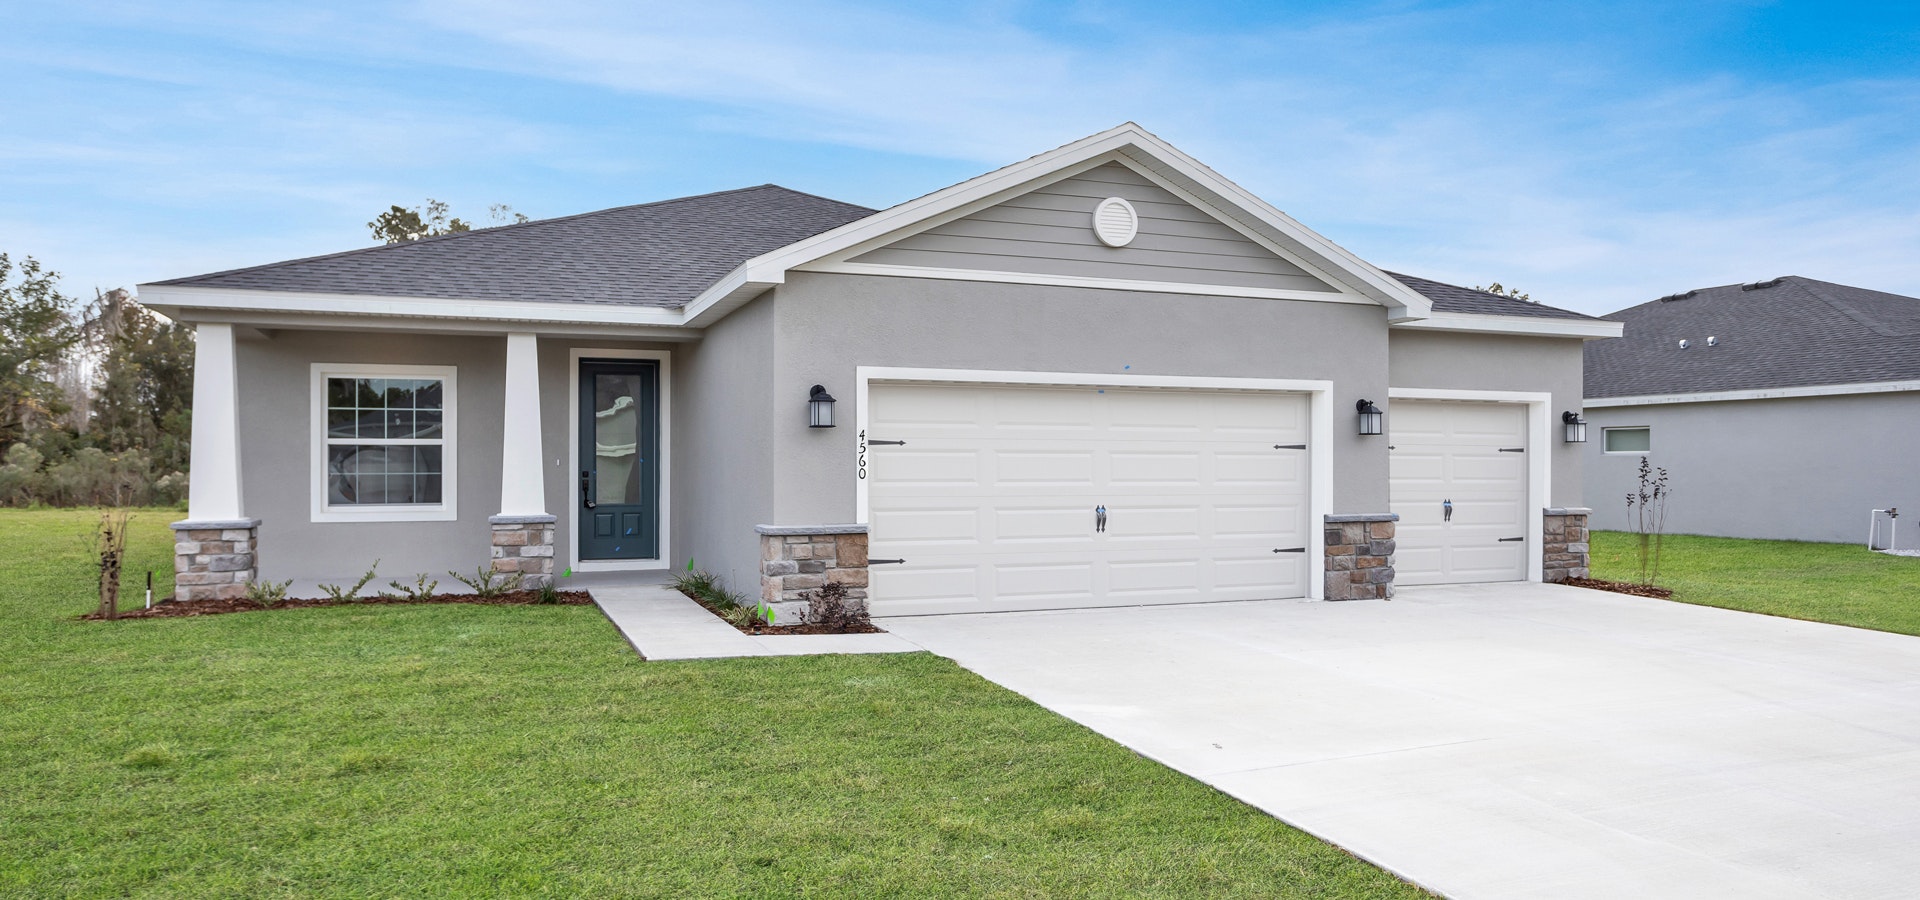 New new home offered at Copperleaf by Highland Homes in Ocala